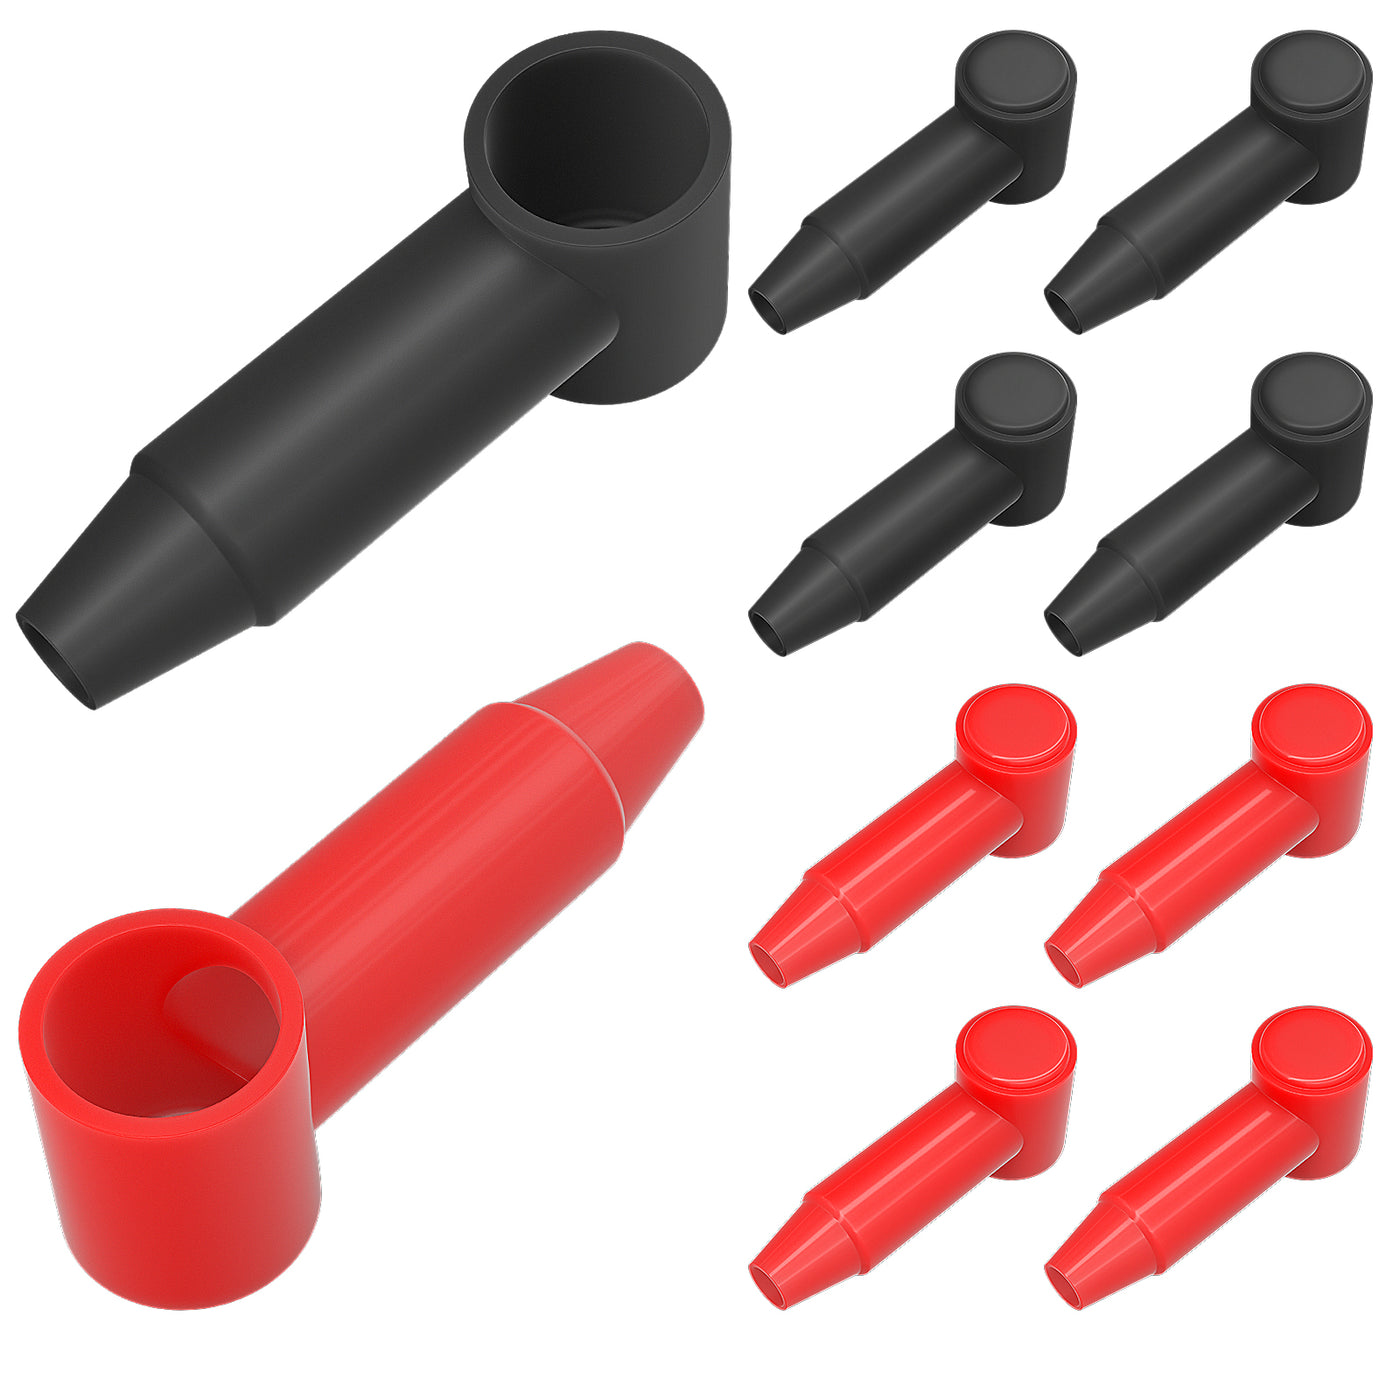 CC125-70 Black and Red Silicone Insulated Stud Terminal Cover